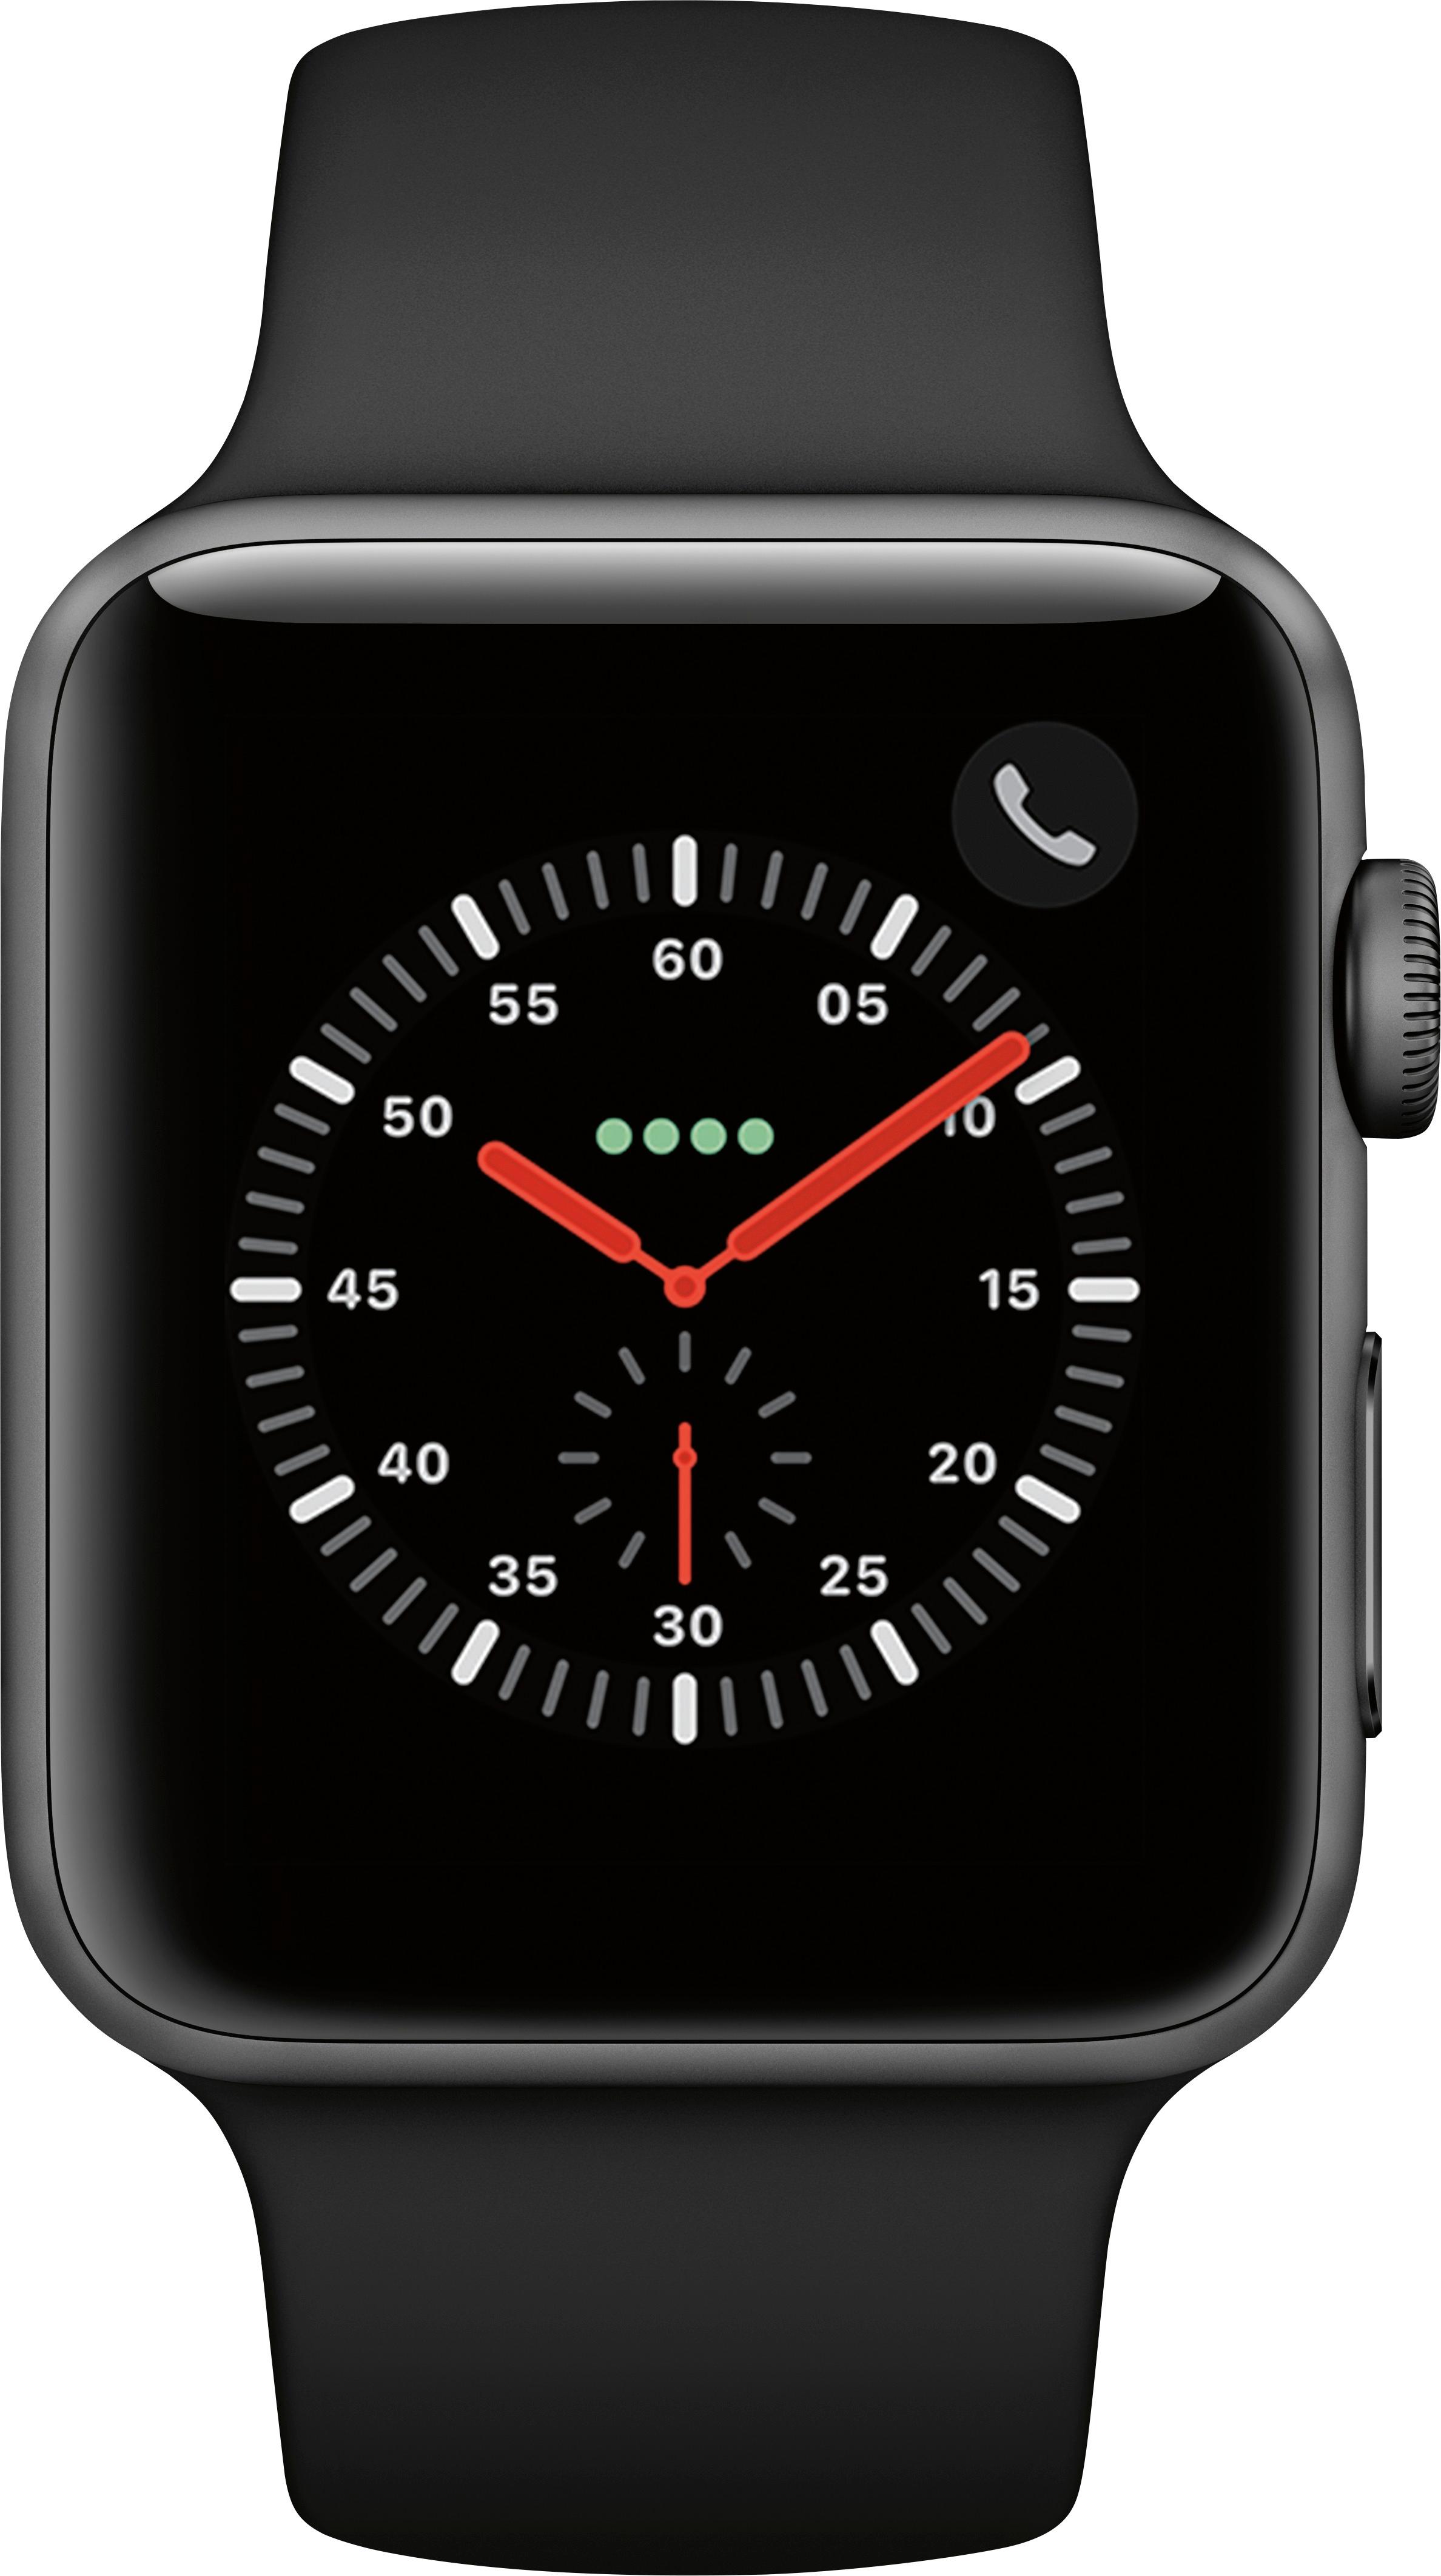 Apple Watch Series 3 features built-in cellular and more - Apple (CA)